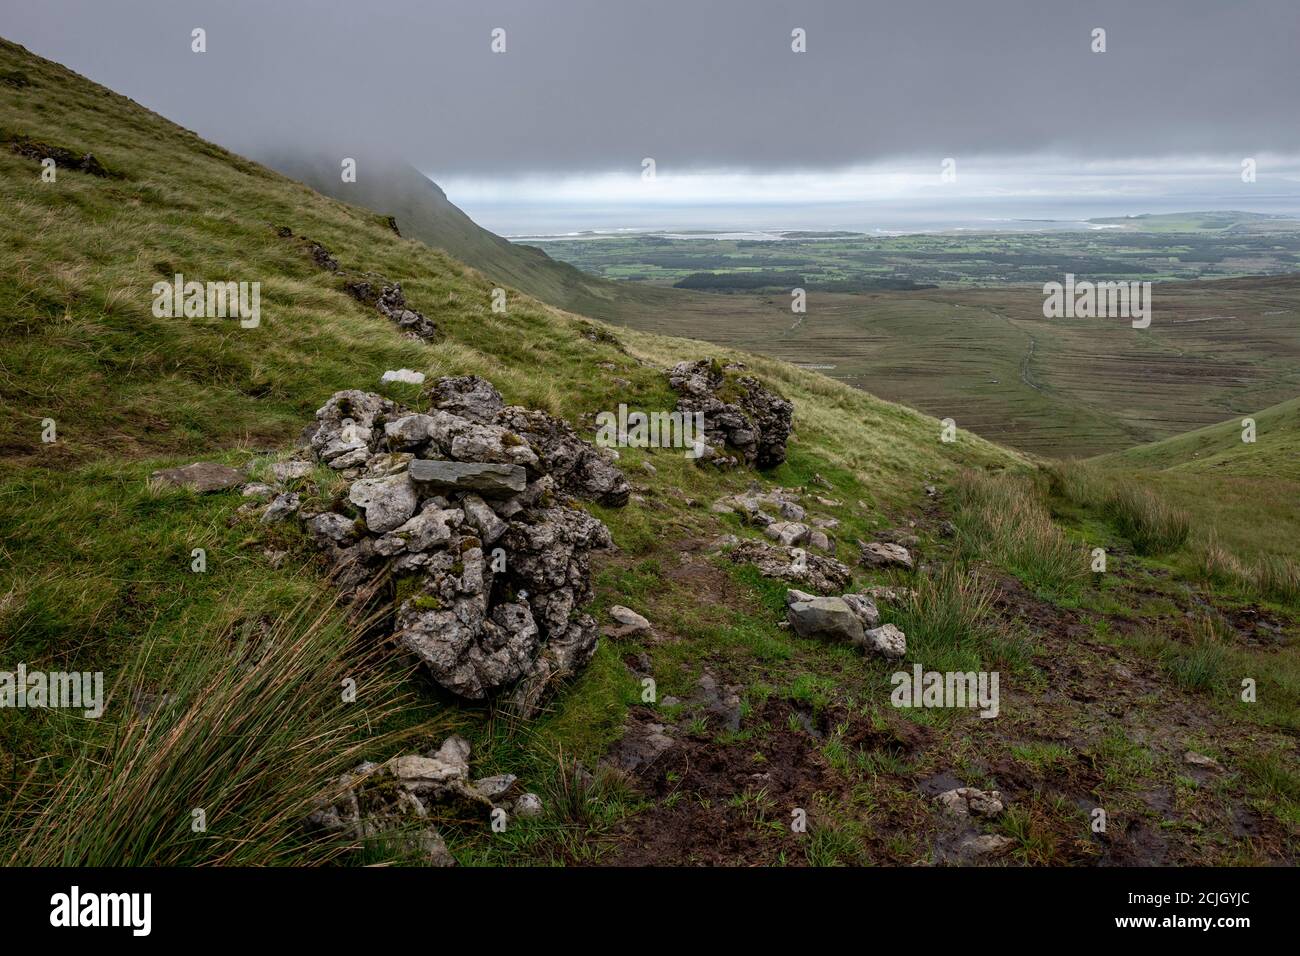 View from the top of Benbulben in County Sligo, Ireland with views over the Atlantic Ocean and Donegal Stock Photo